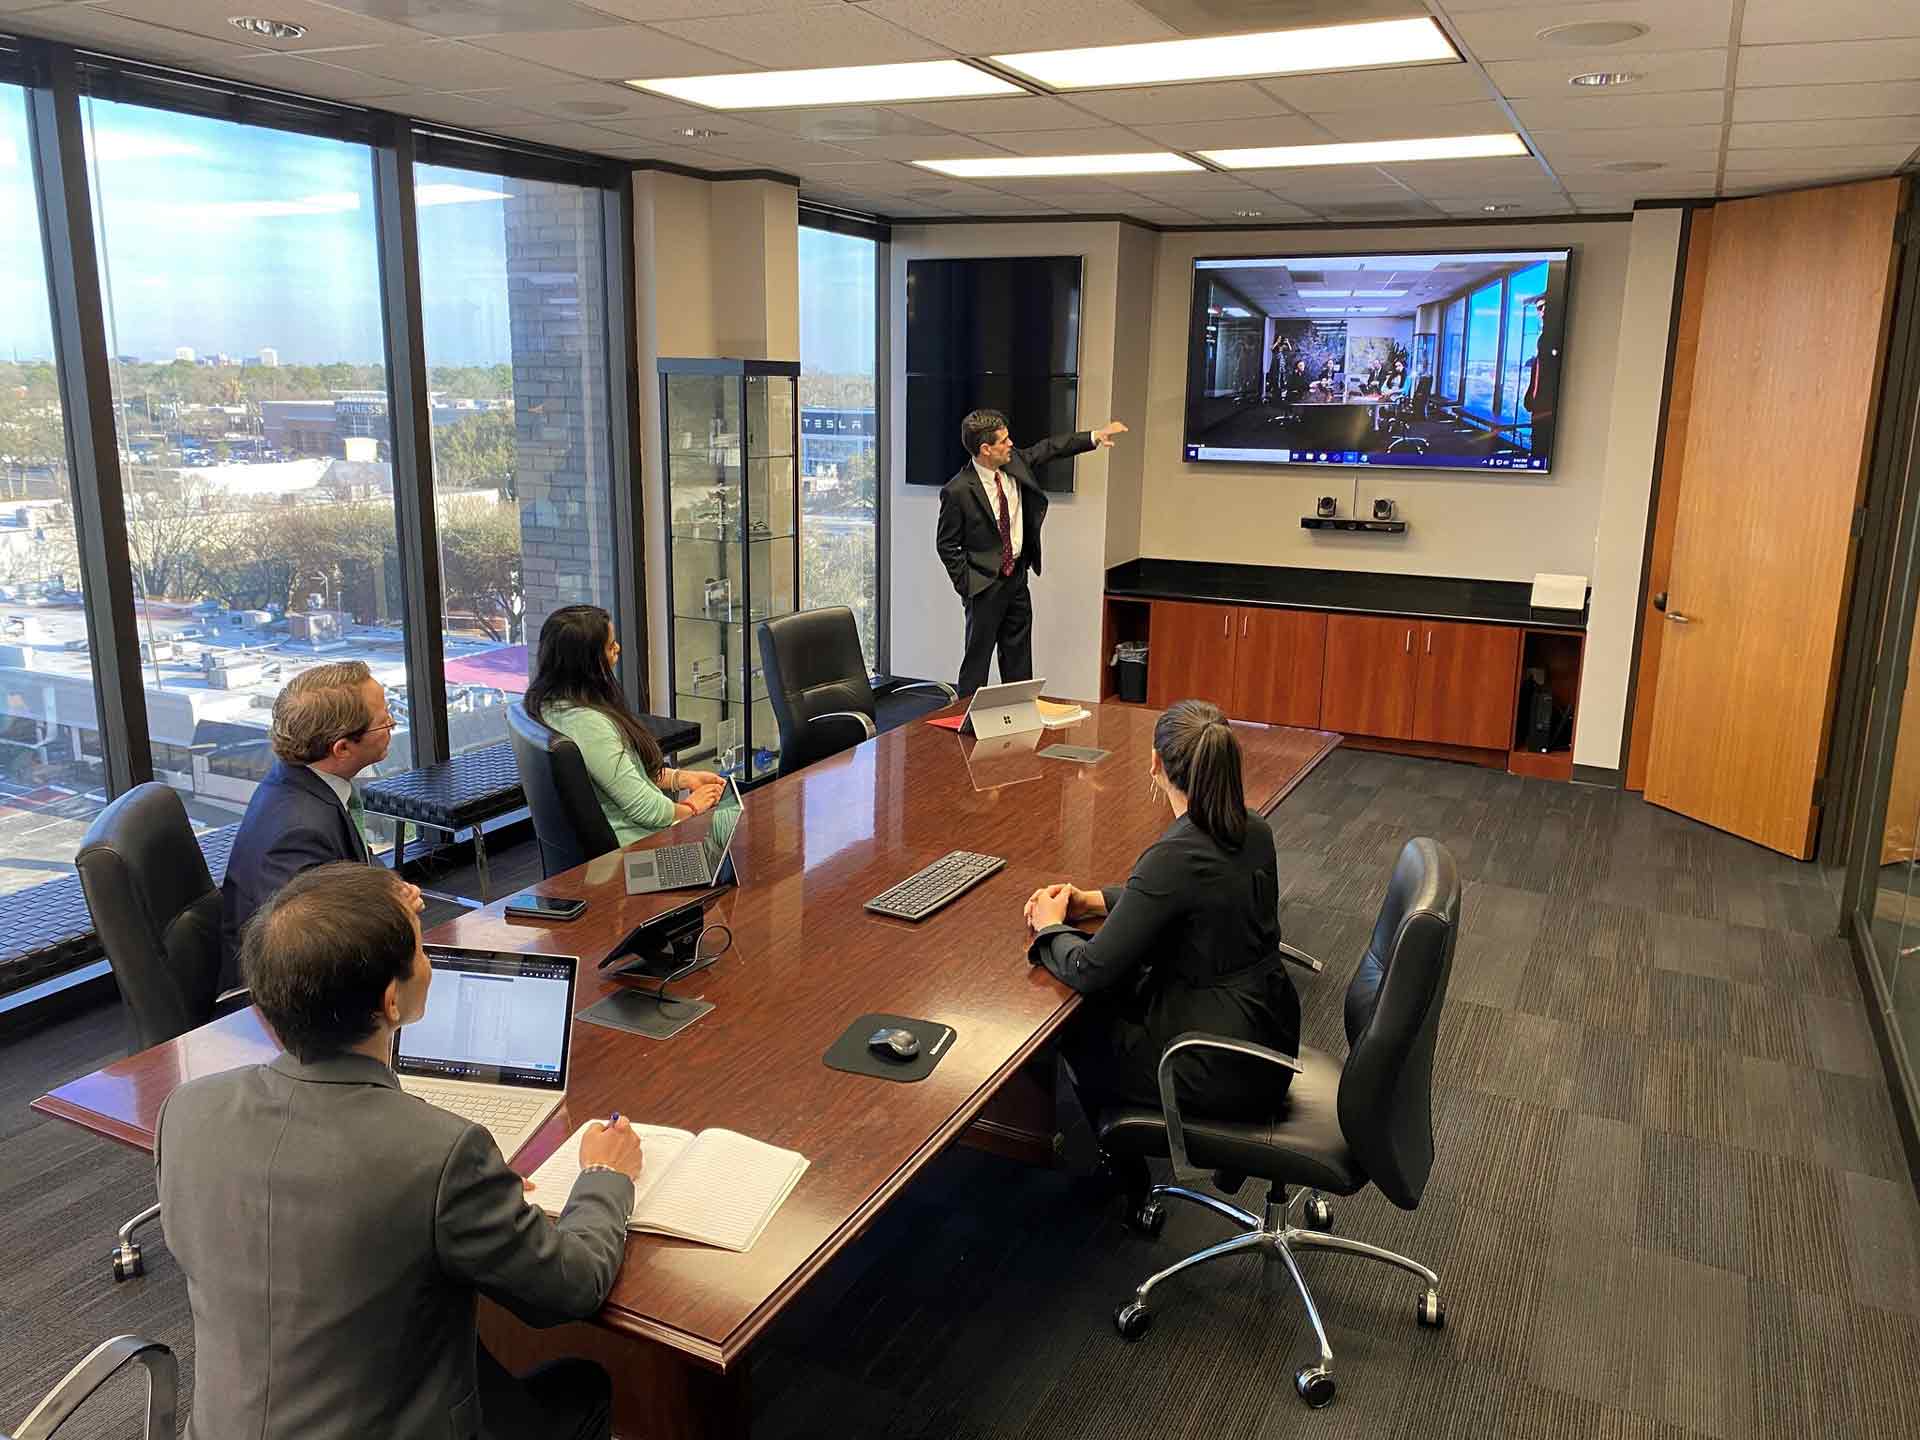 Conference room rental in Houston. Boardroom has TV, large table and seating for 6.